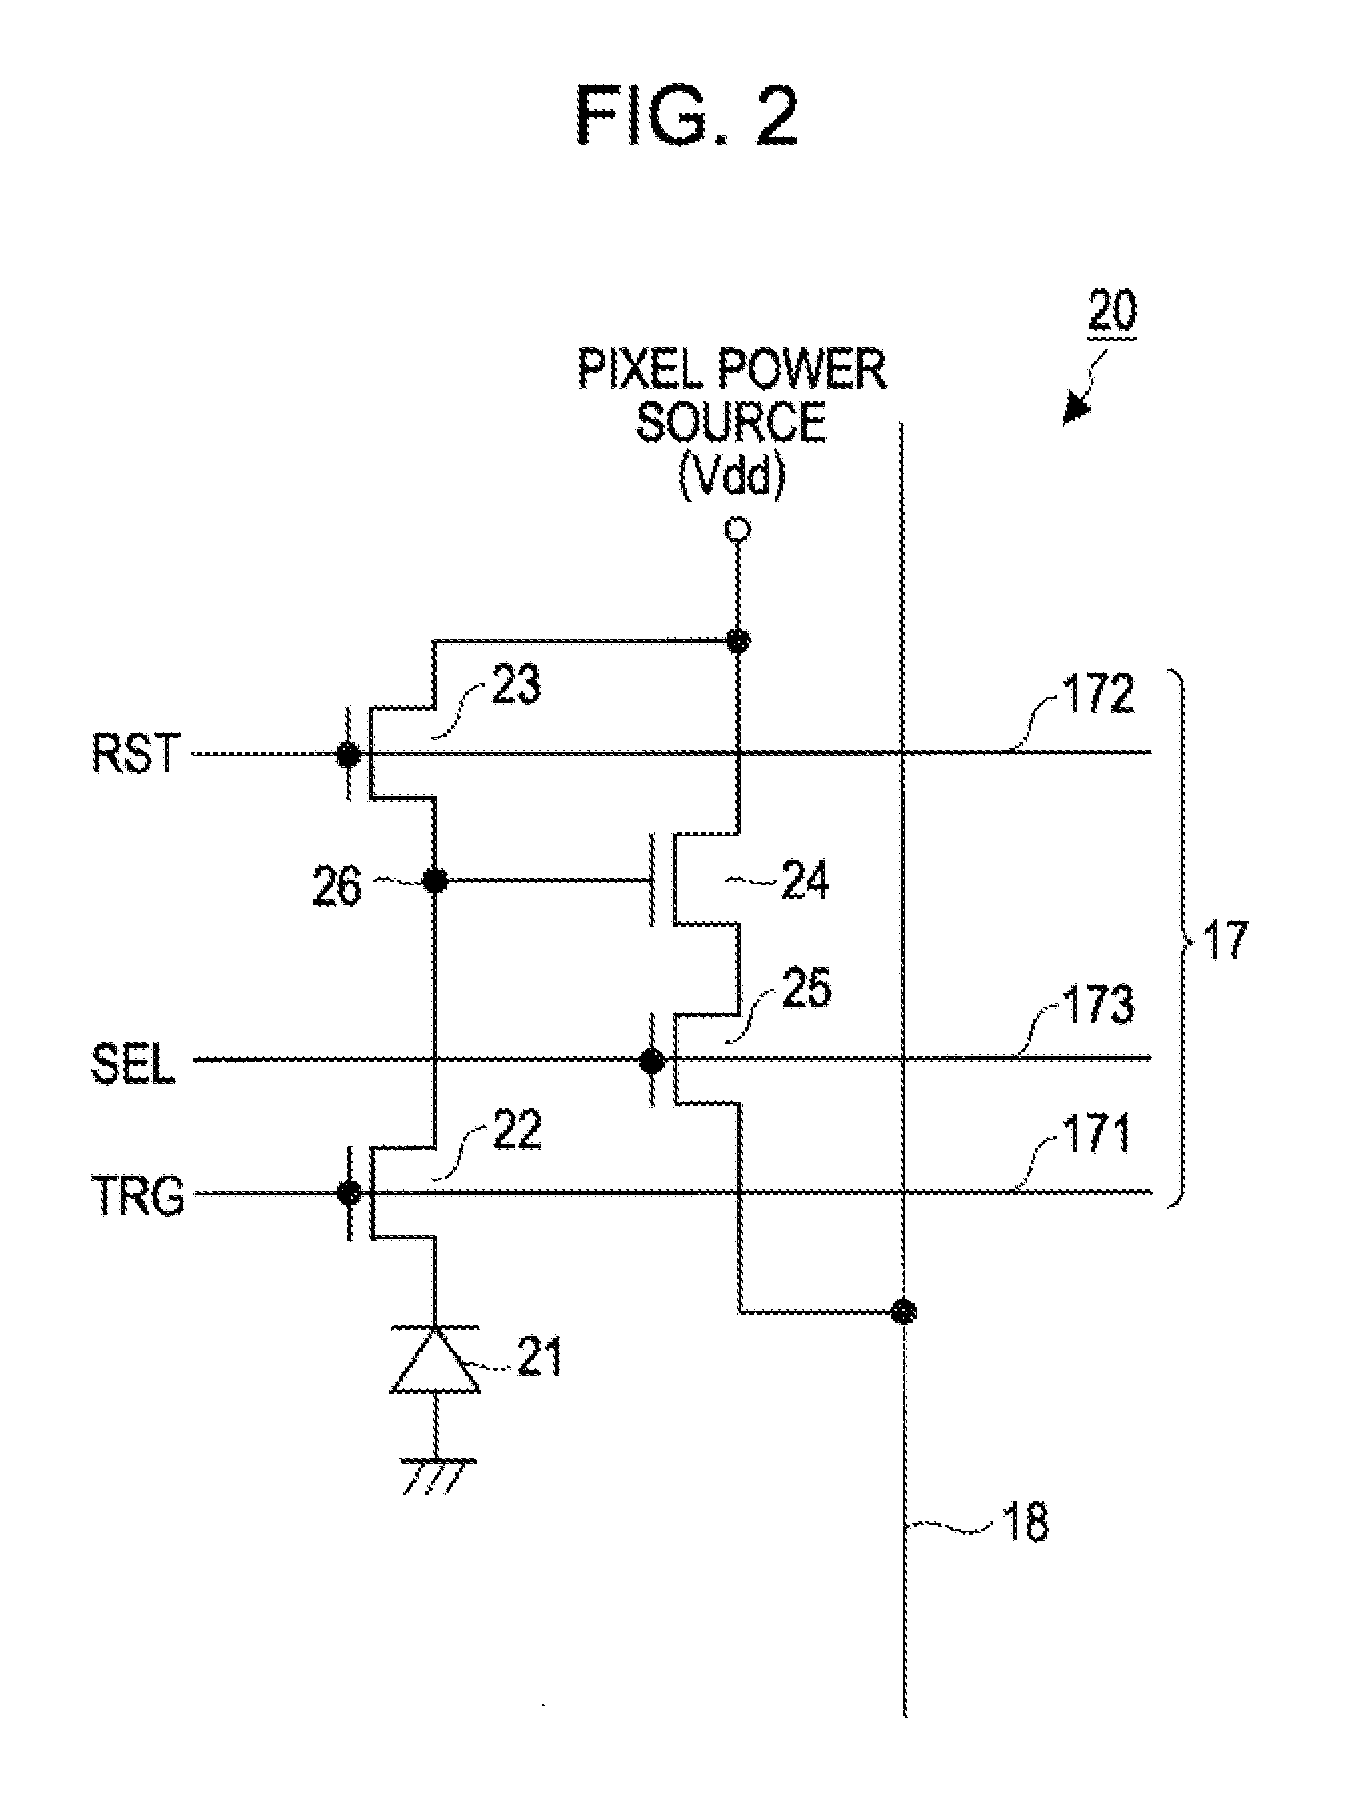 Solid-state imaging device, method of driving the same, and electronic system including the device